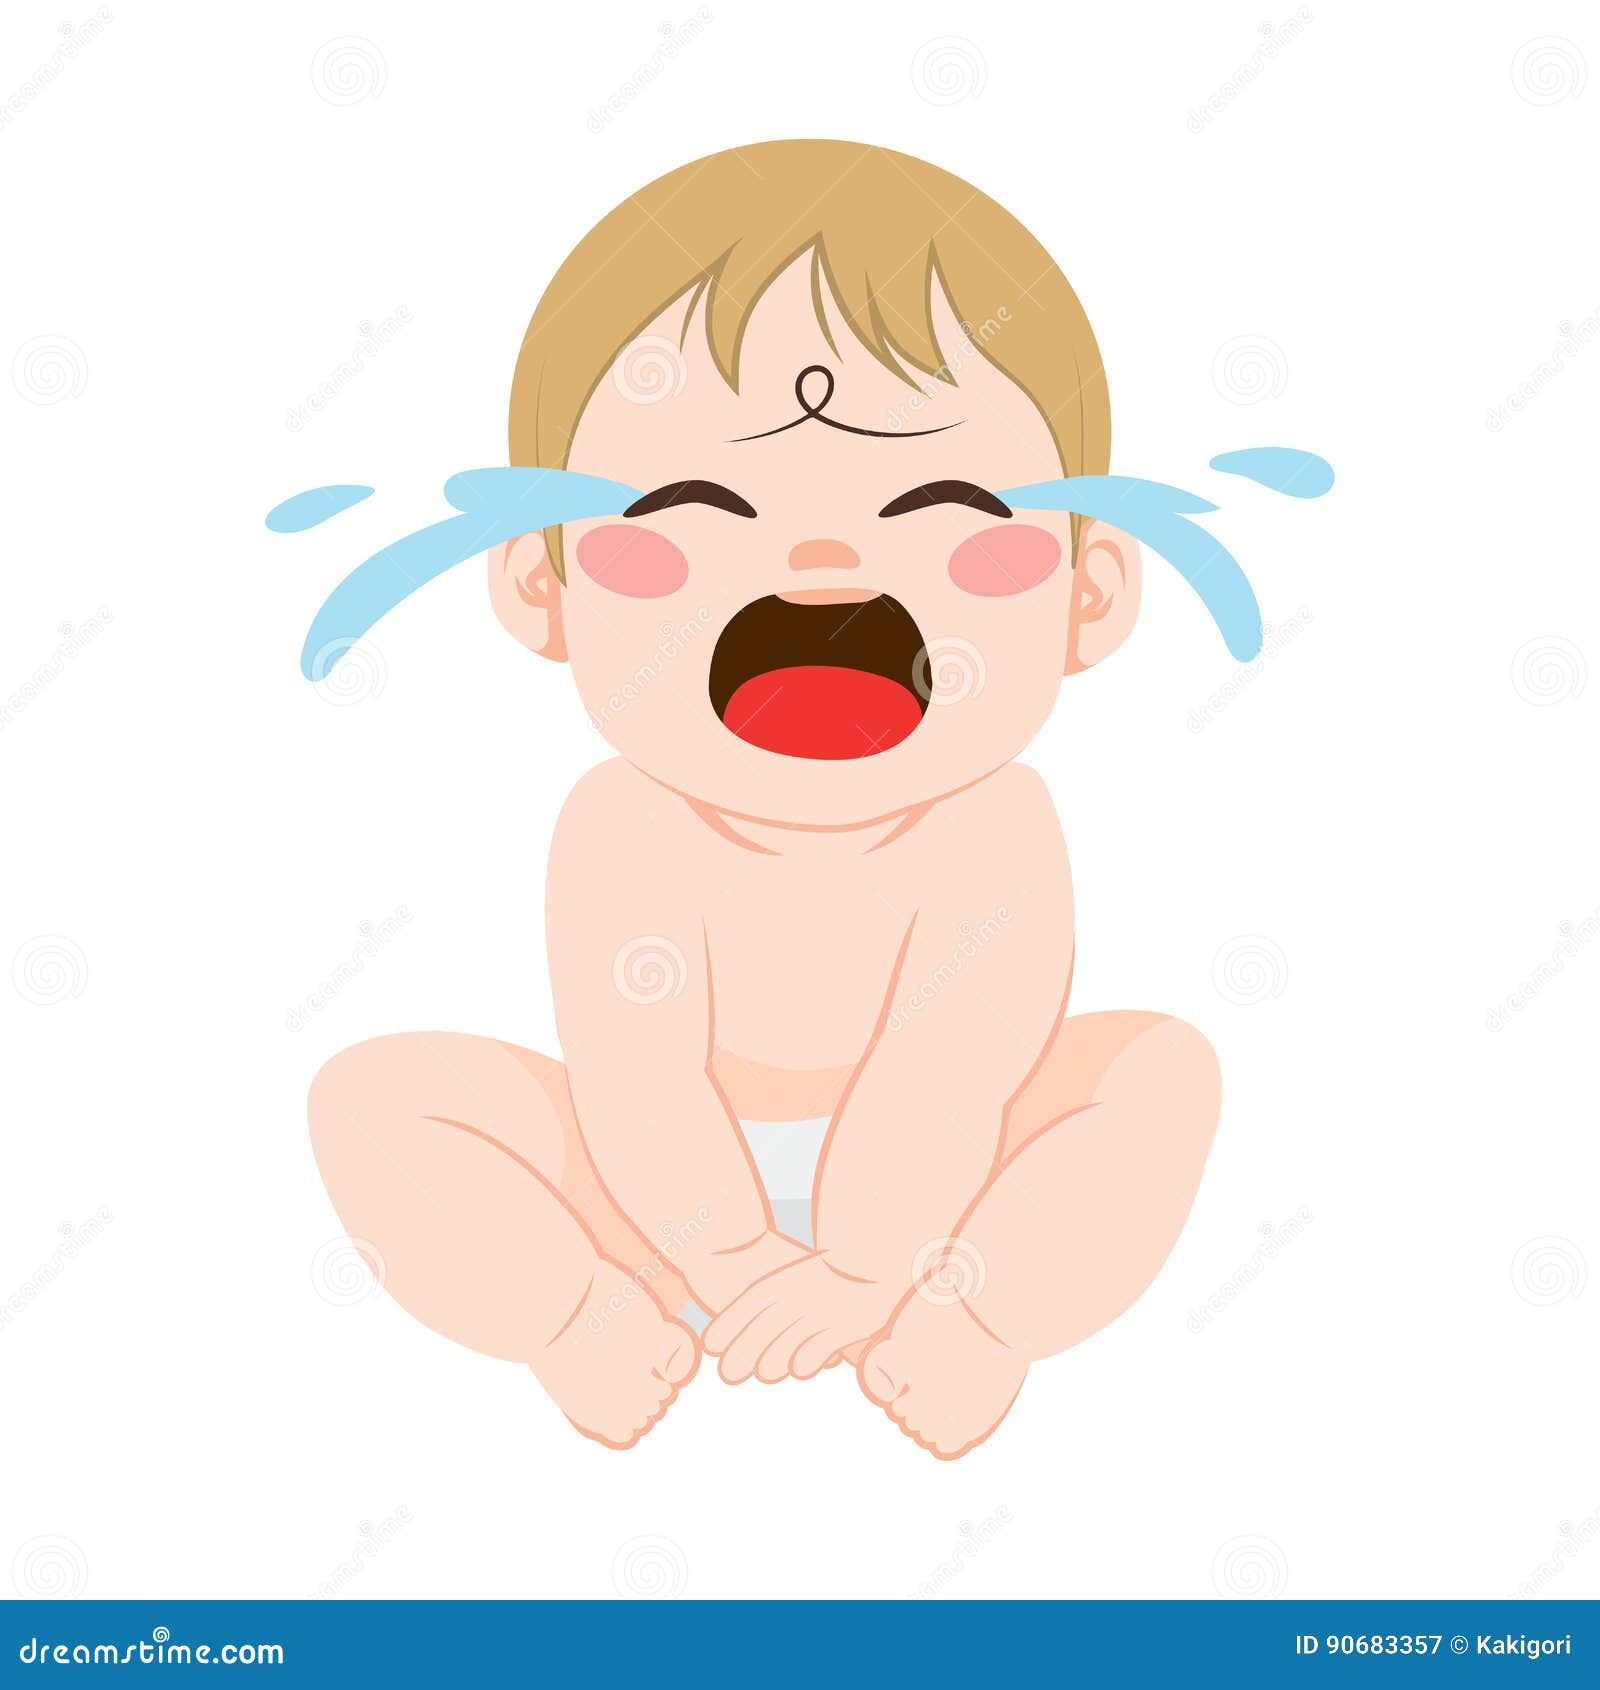 Drawing crying Baby 😍 - YouTube